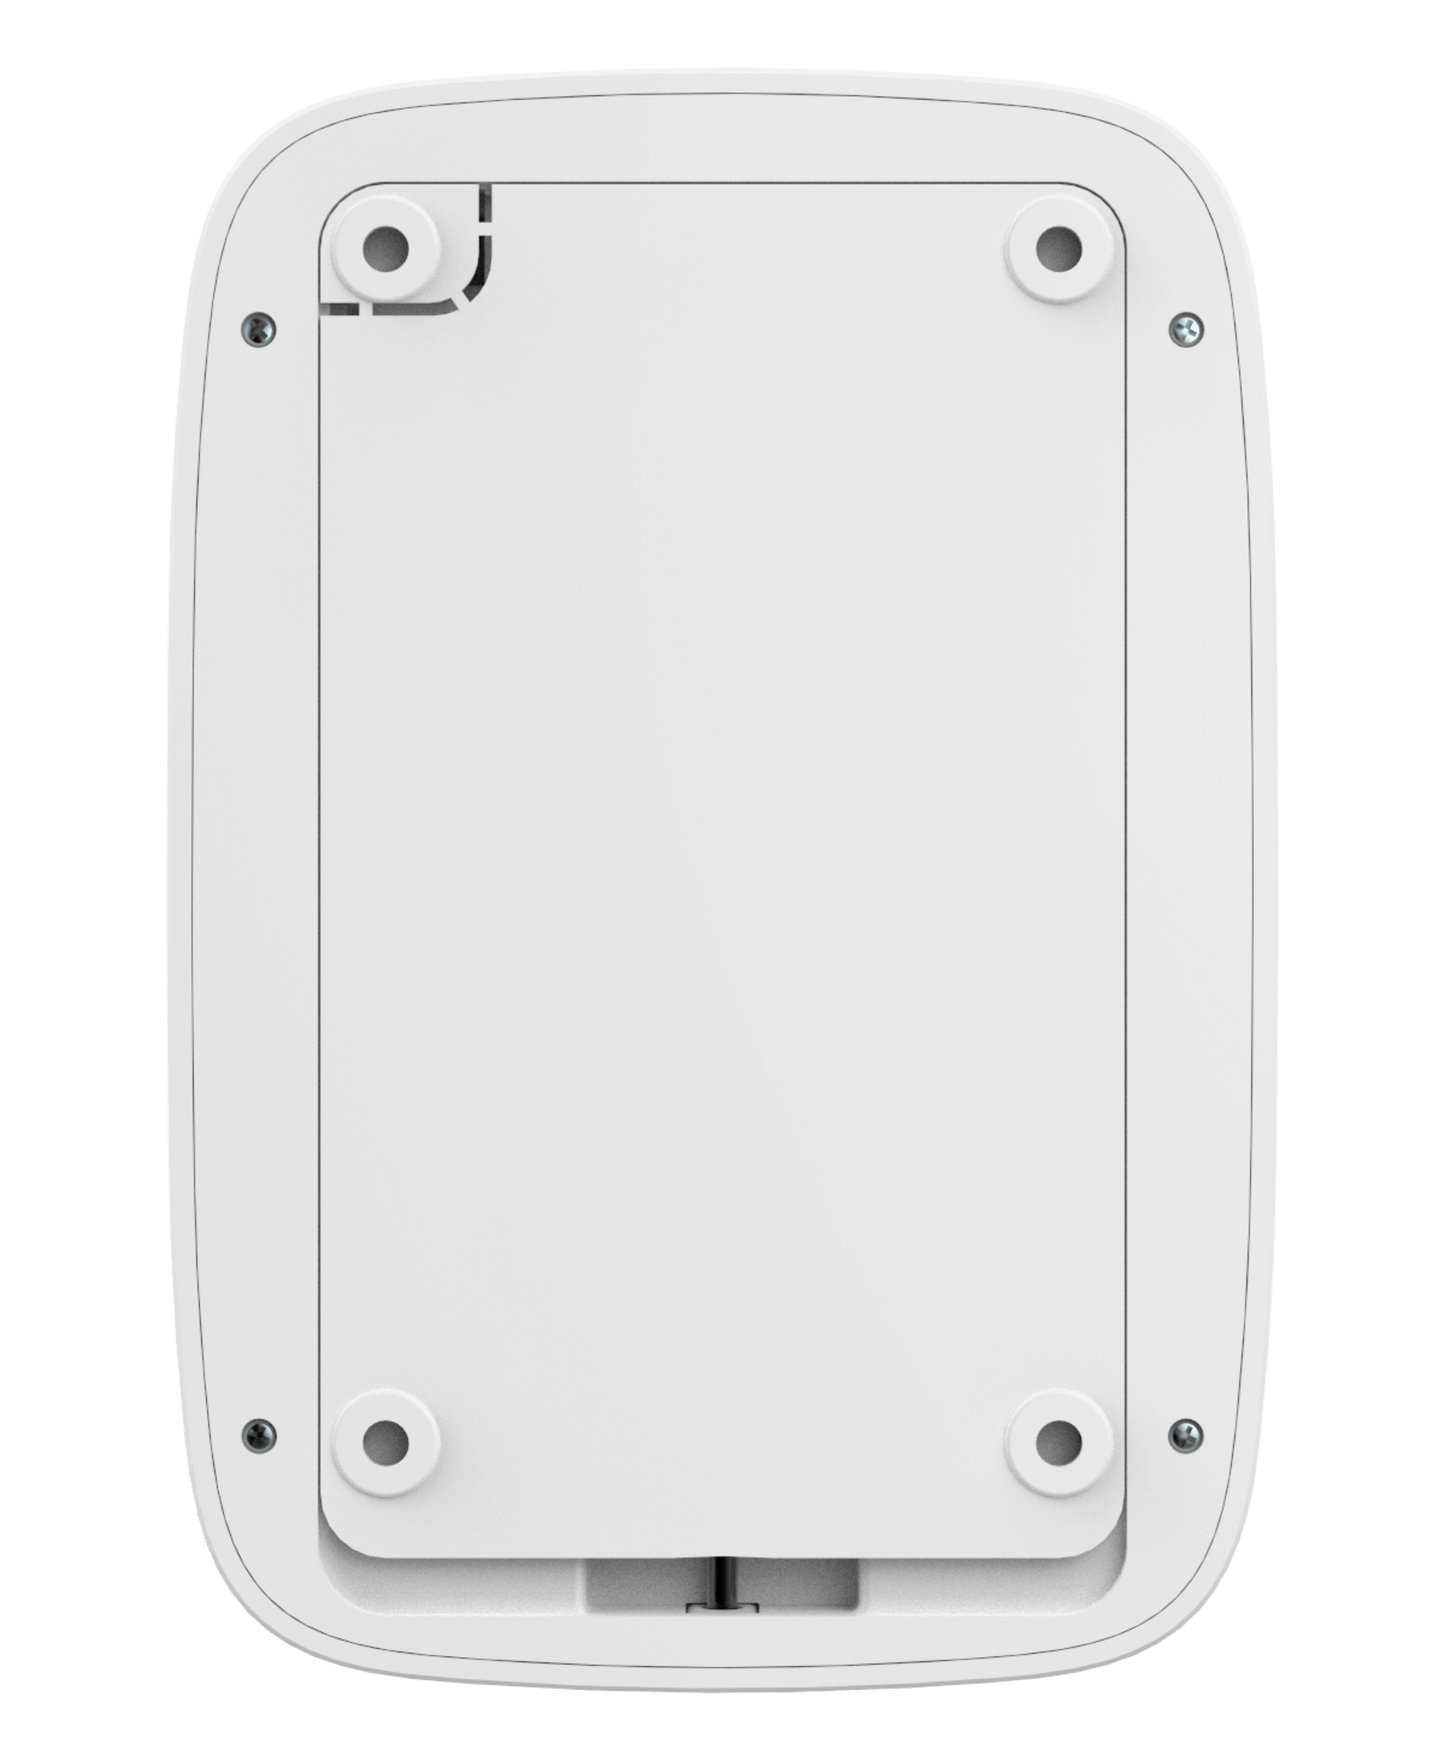 White Ajax KeyPad a practical numerical keypad for alarm system control,  150 × 103 × 14 mm in size , 197grams in weight for smart home and business security, backside view